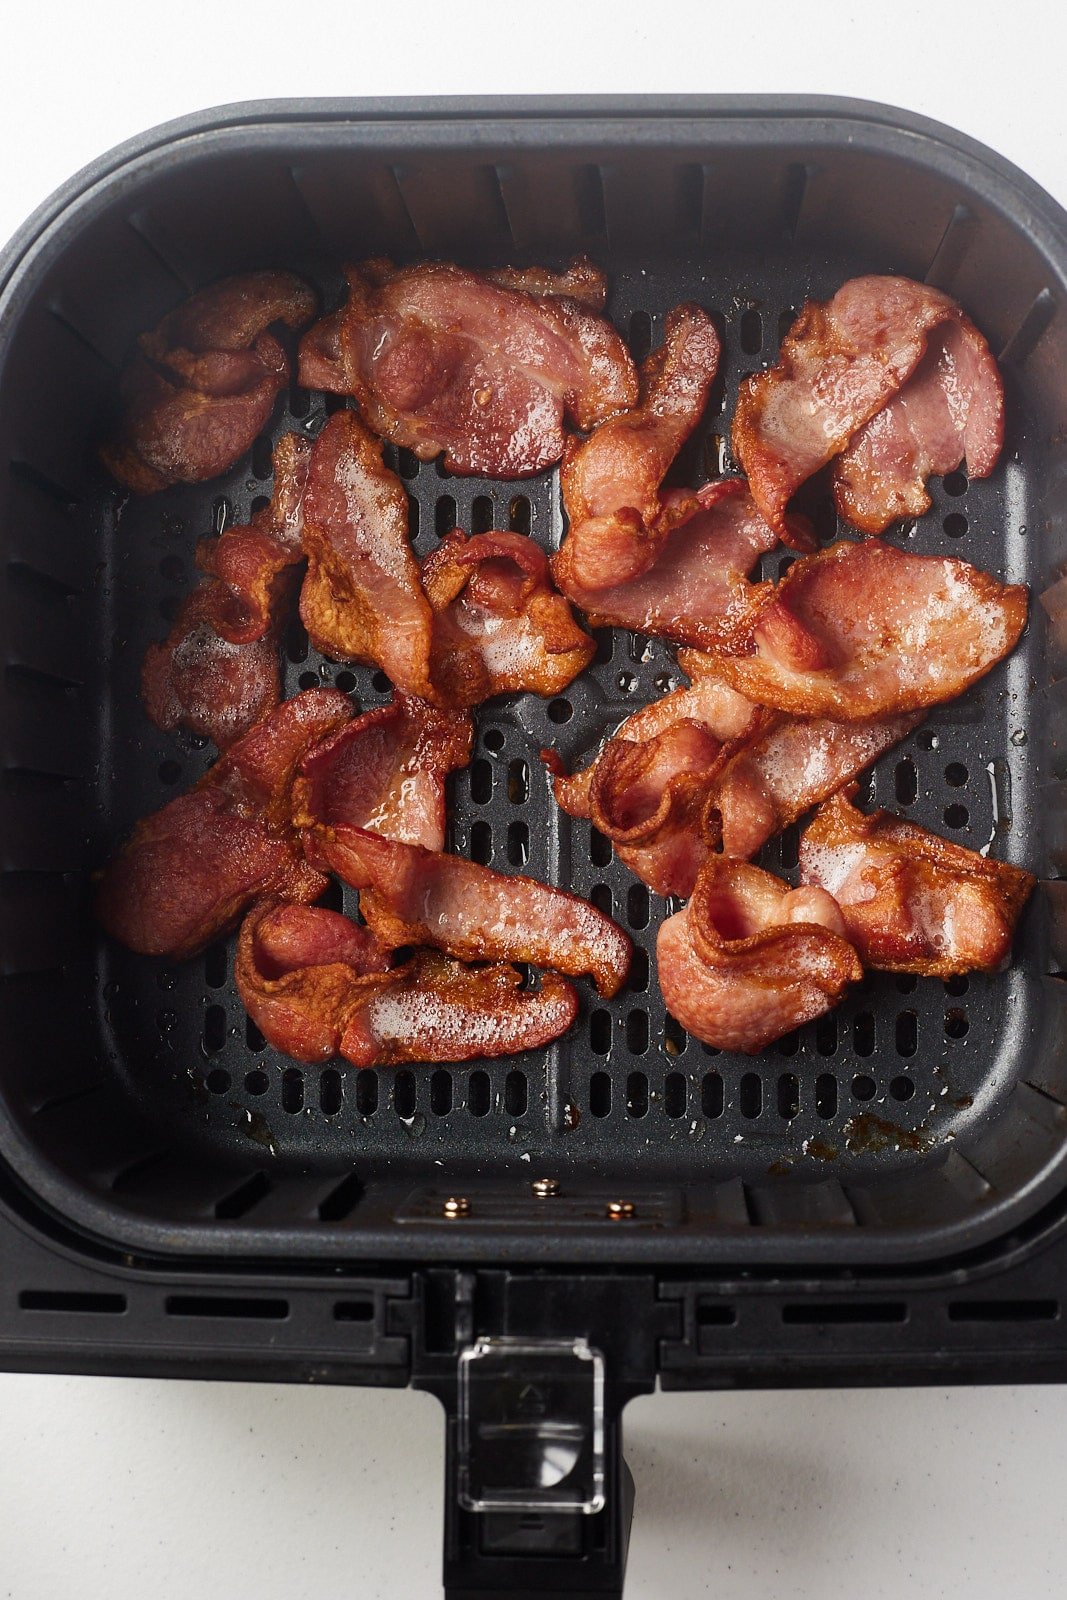 Overhead shot of the bacon cooked in the air fryer basket.